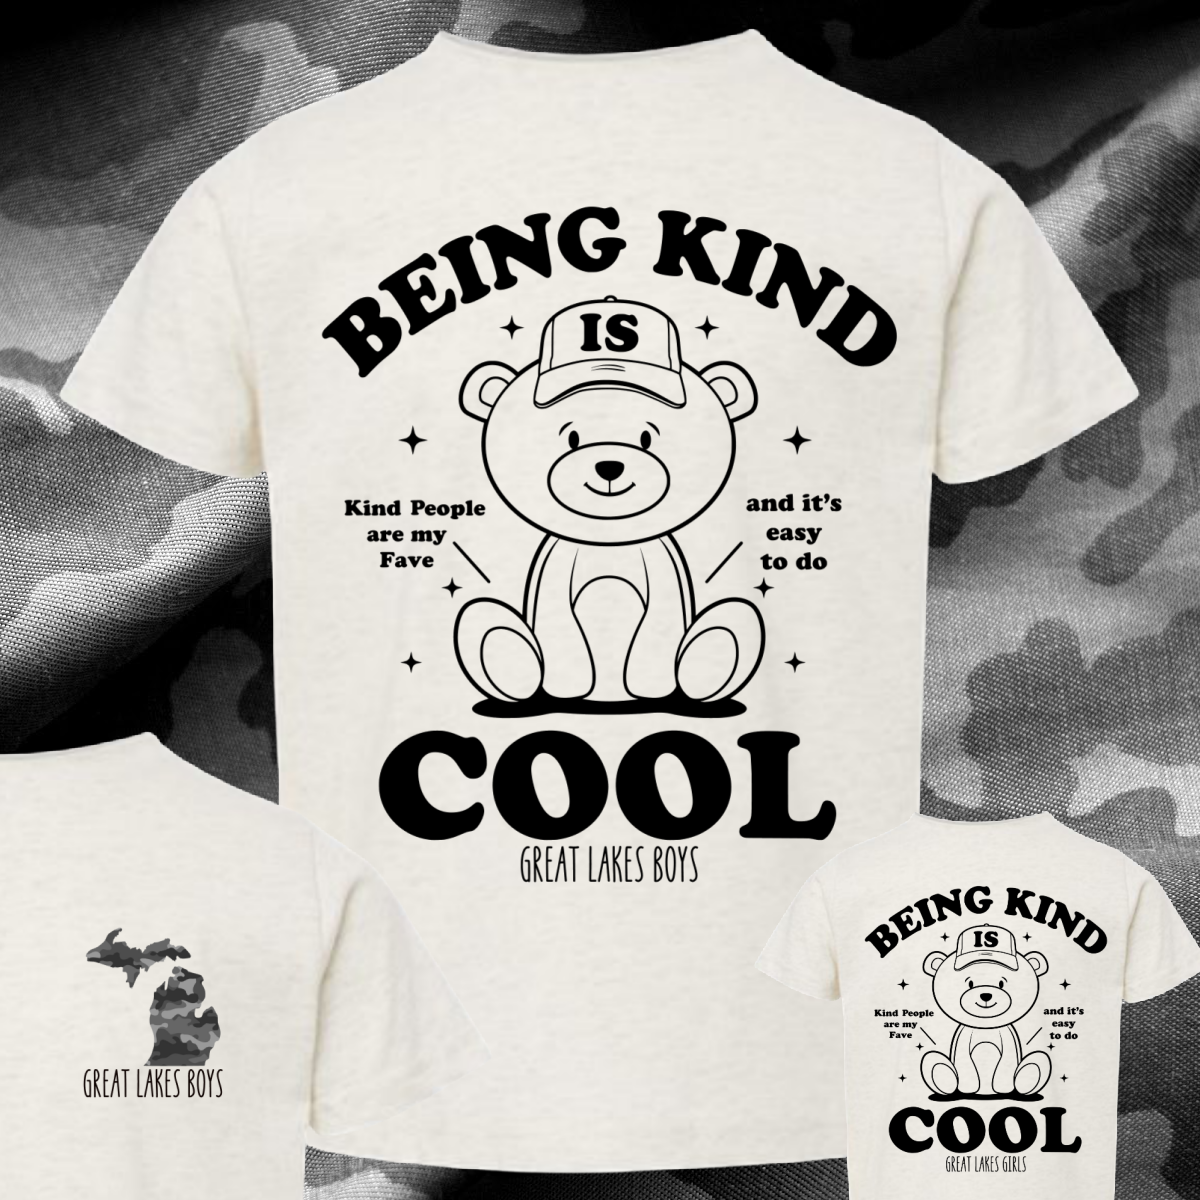 $9 Tee of the Month!   Great Lakes Boys - Being Kind Is Cool